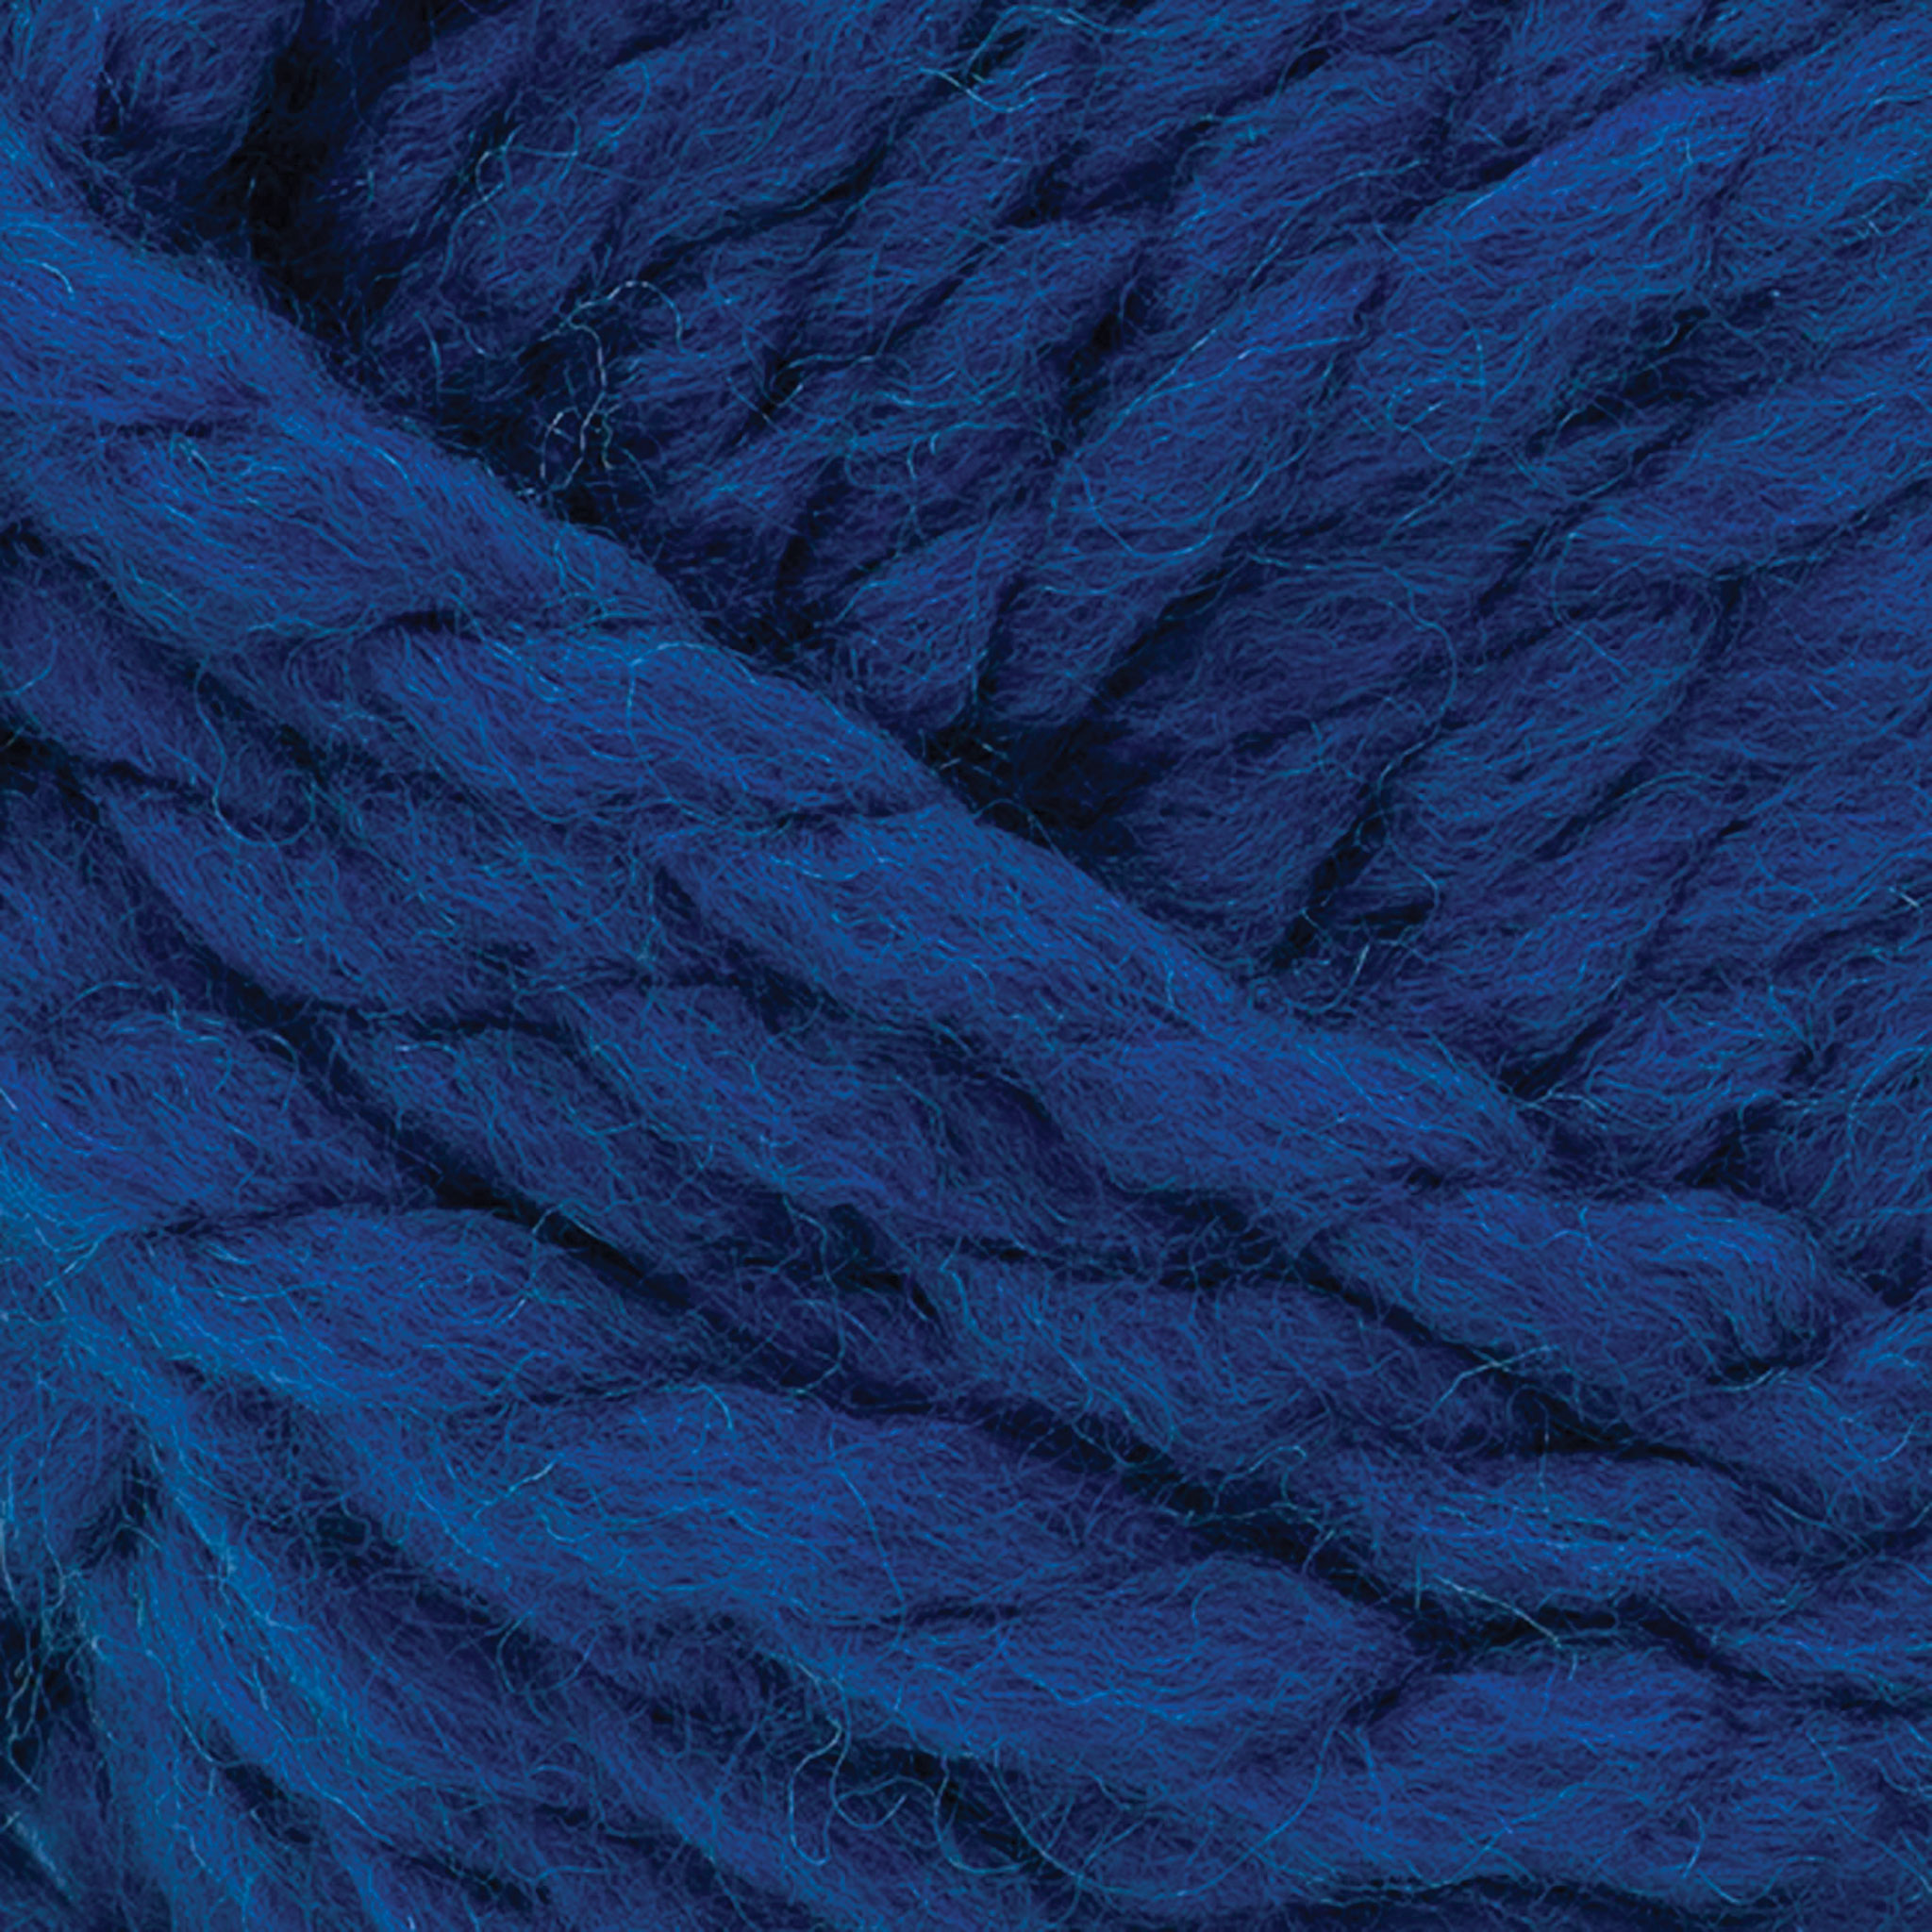 Lion Brand Wool Ease Thick & Quick Recycled Yarn - Royal Blue, 106 yds